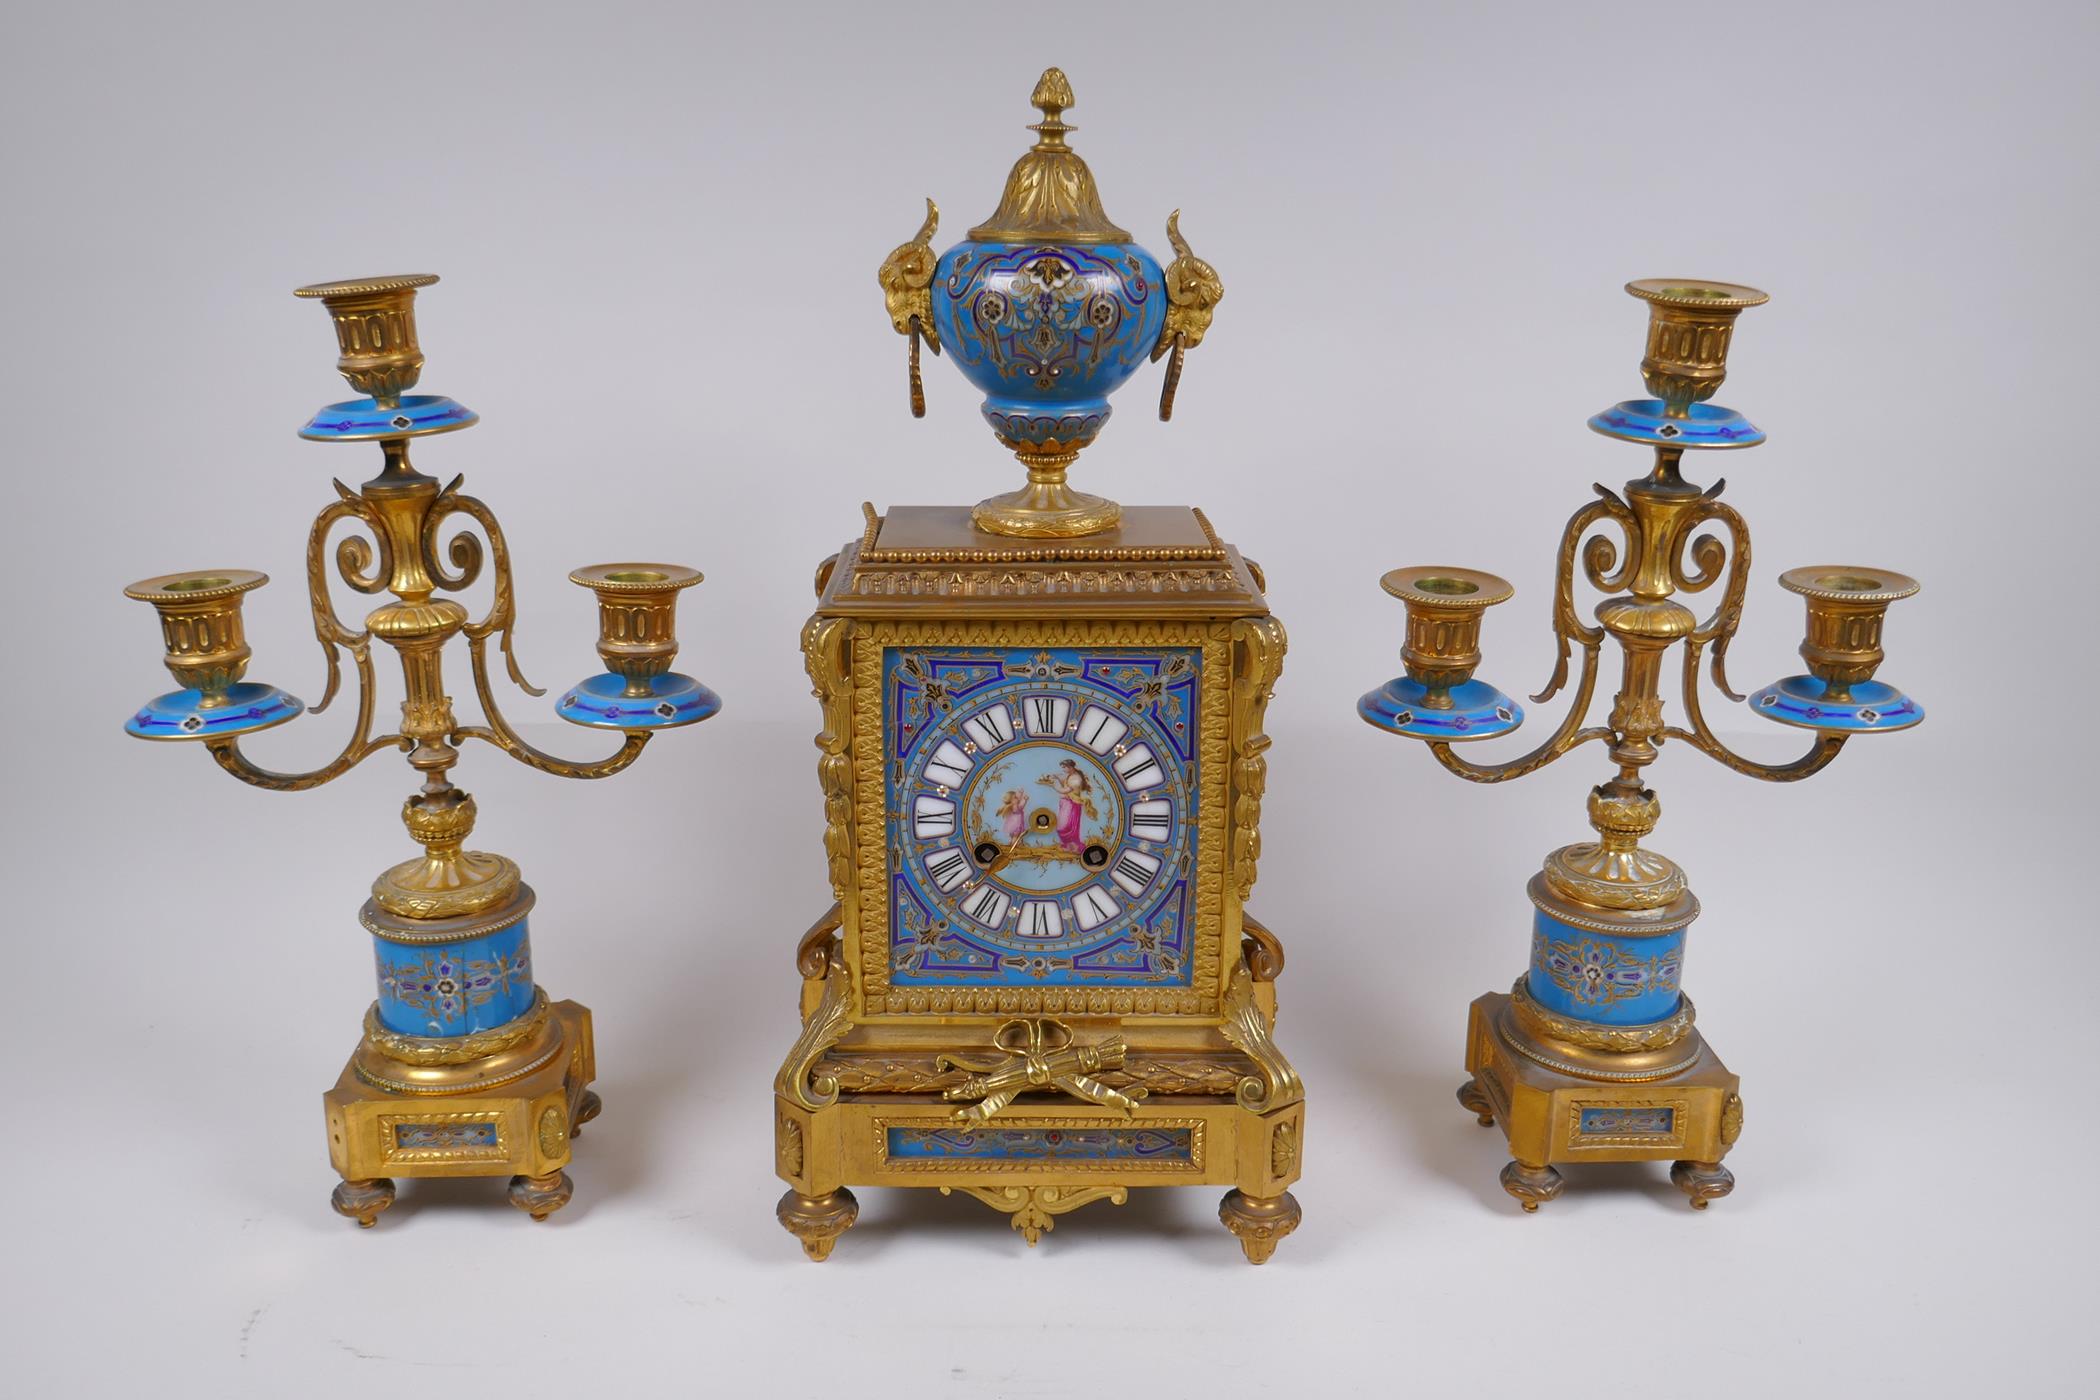 A late C19th/early C20th French ormolu and Sevres style porcelain clock garniture, the hand